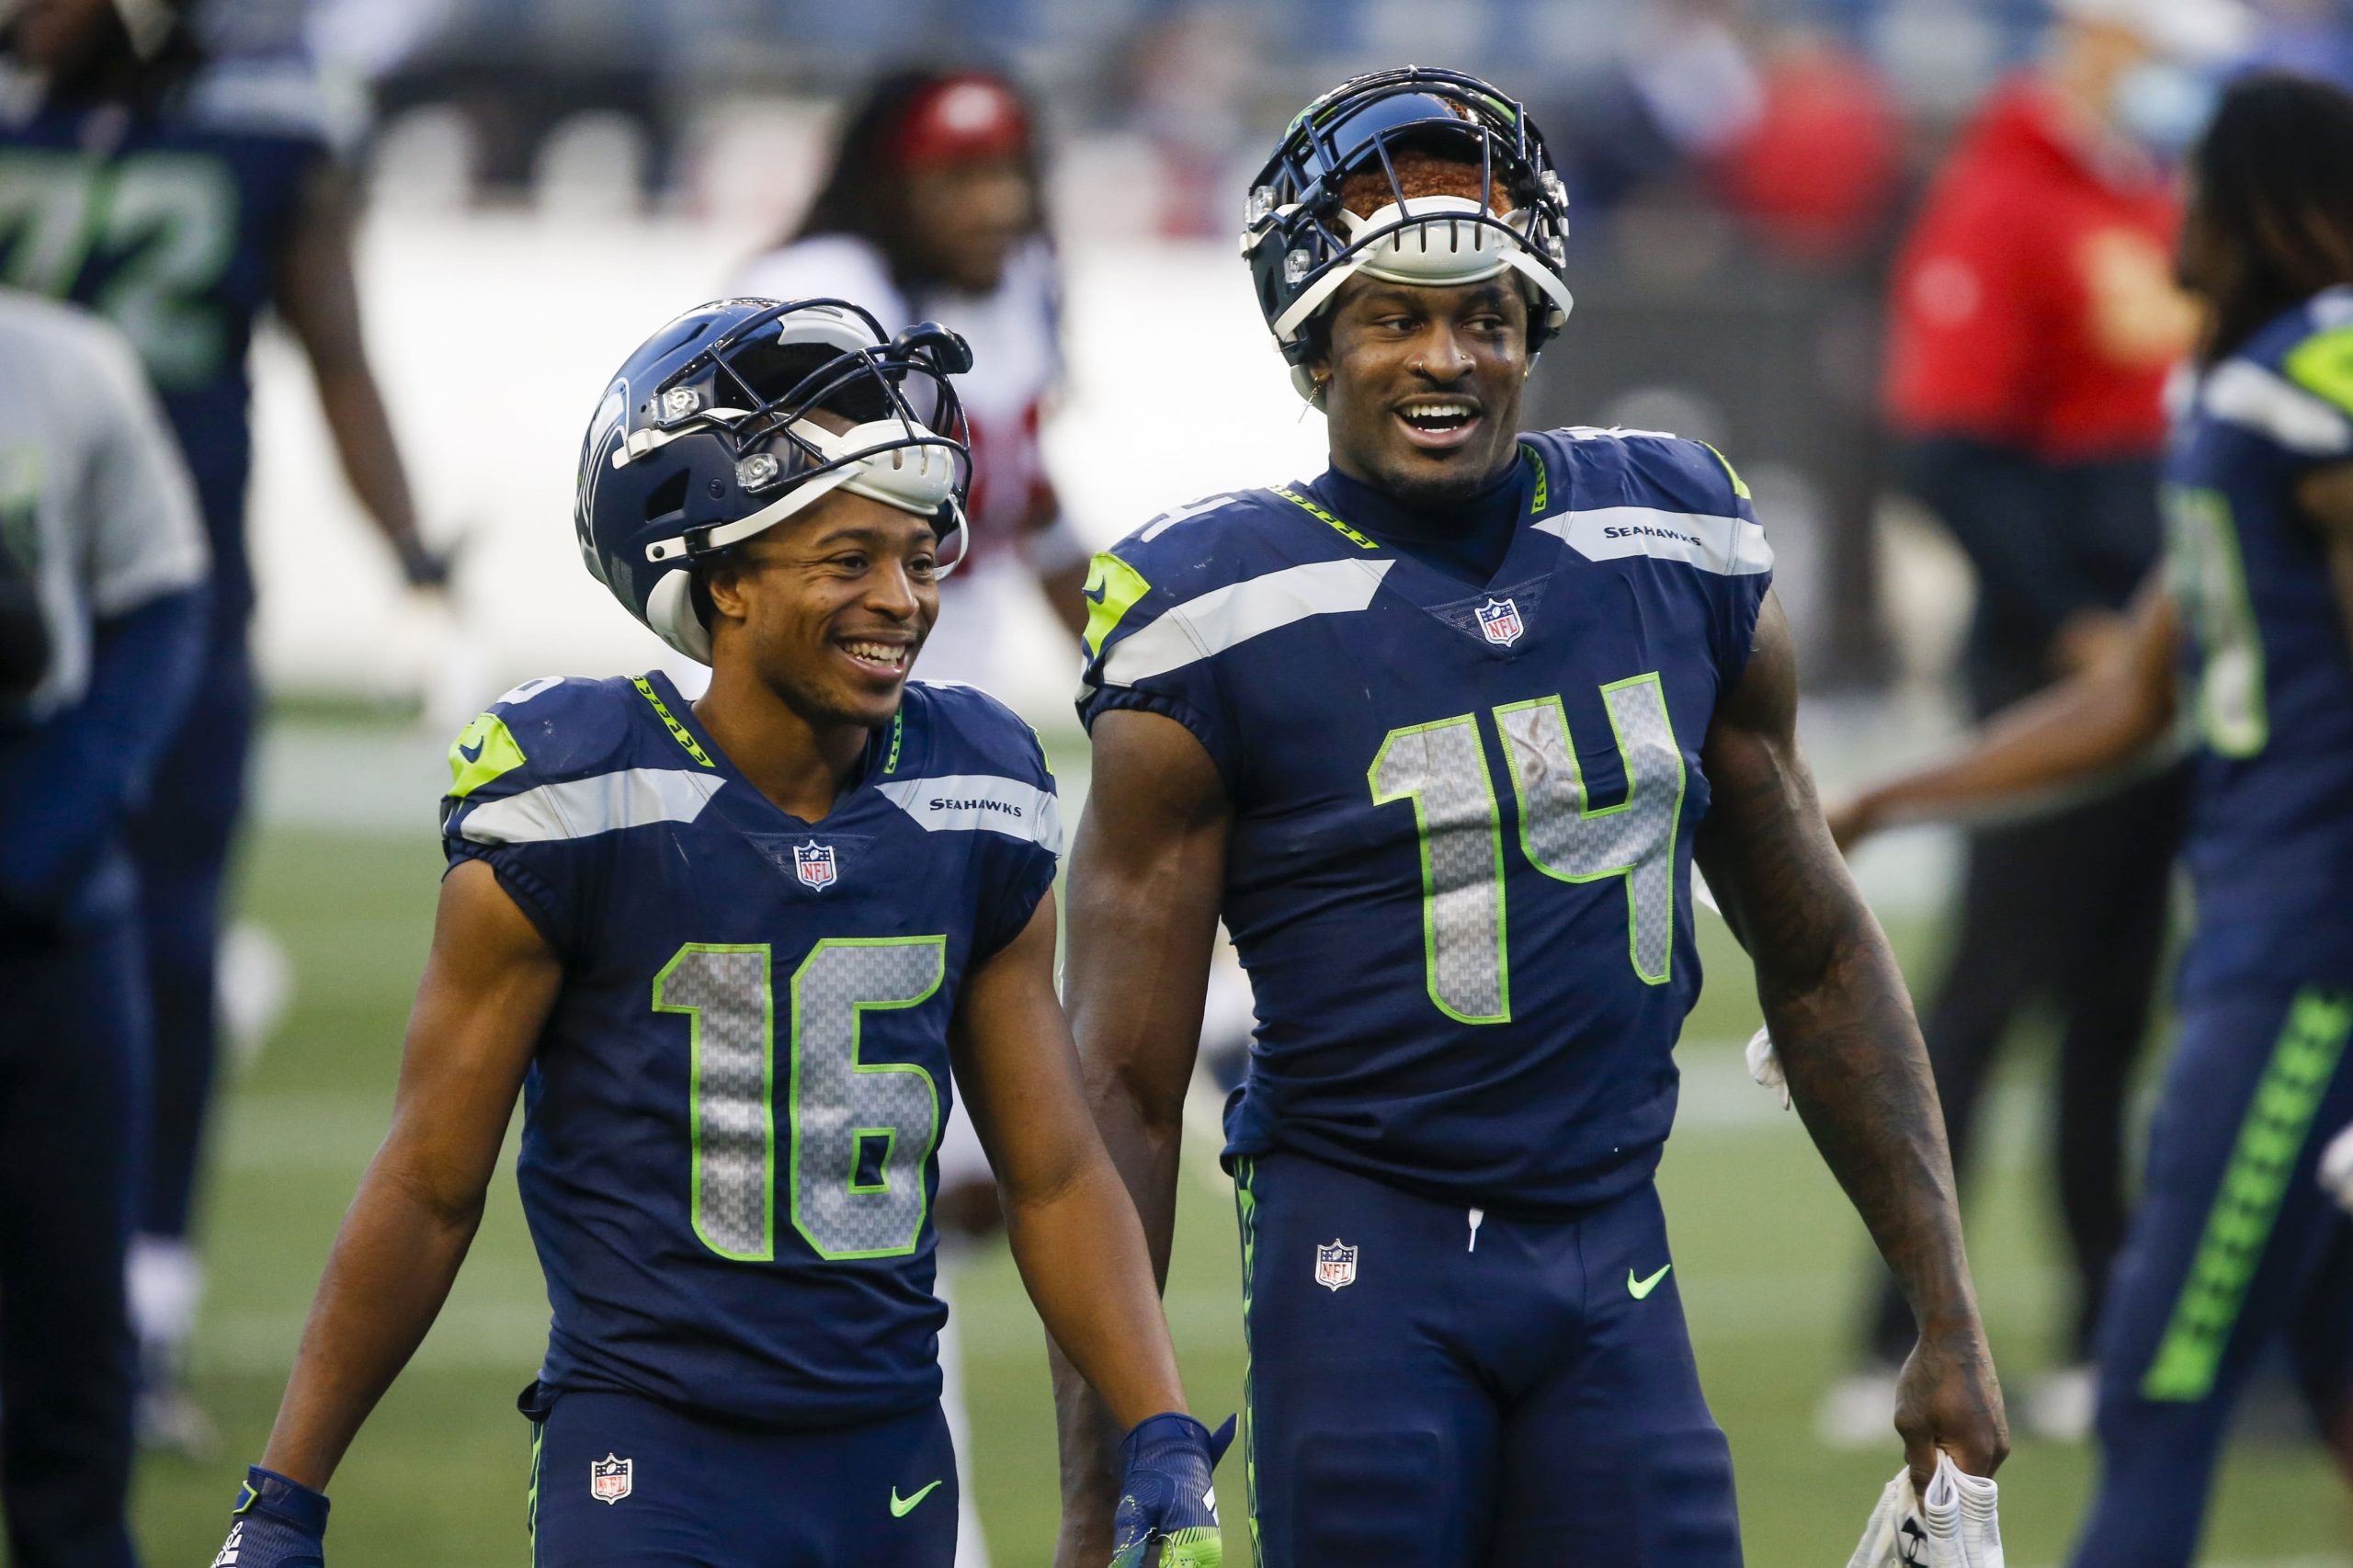 Seattle Seahawks wide receiver Tyler Lockett (16) and wide receiver DK Metcalf (14) return to the locker room following a 37-27 victory against the San Francisco 49ers at CenturyLink Field.